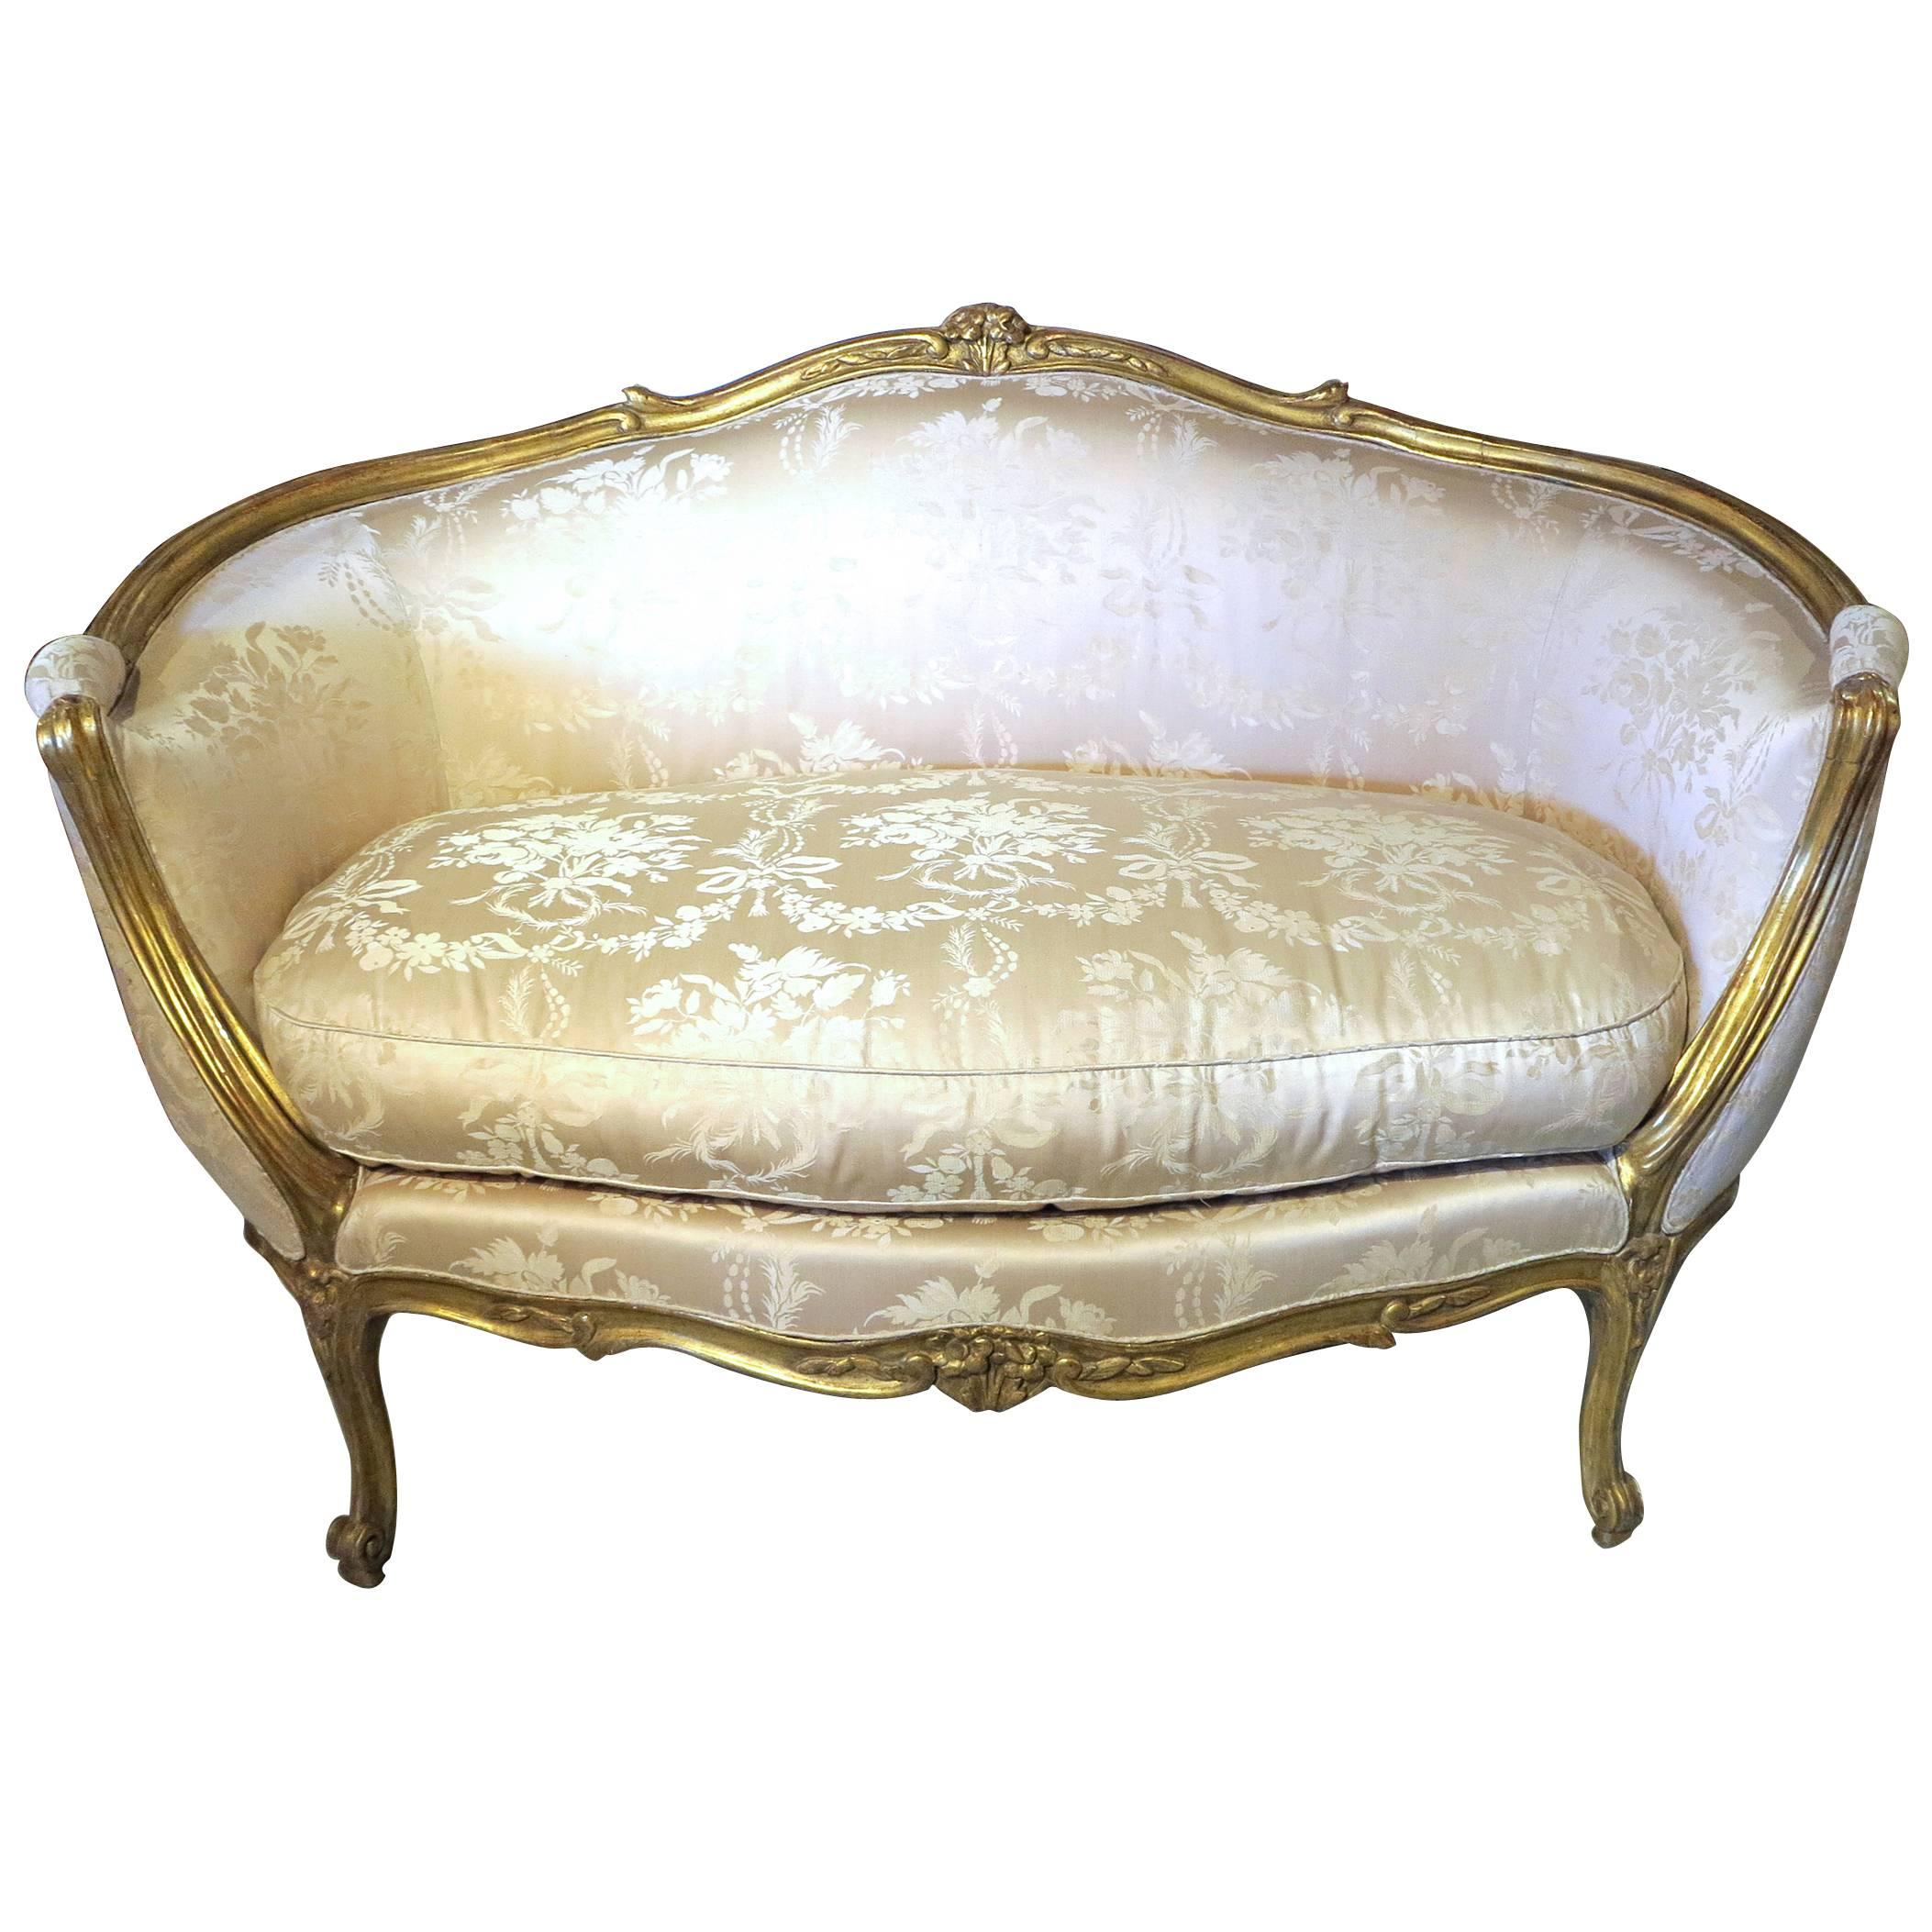 Very Fine and Rare Louis XV Cream-Painted Canape by Etienne Meunier